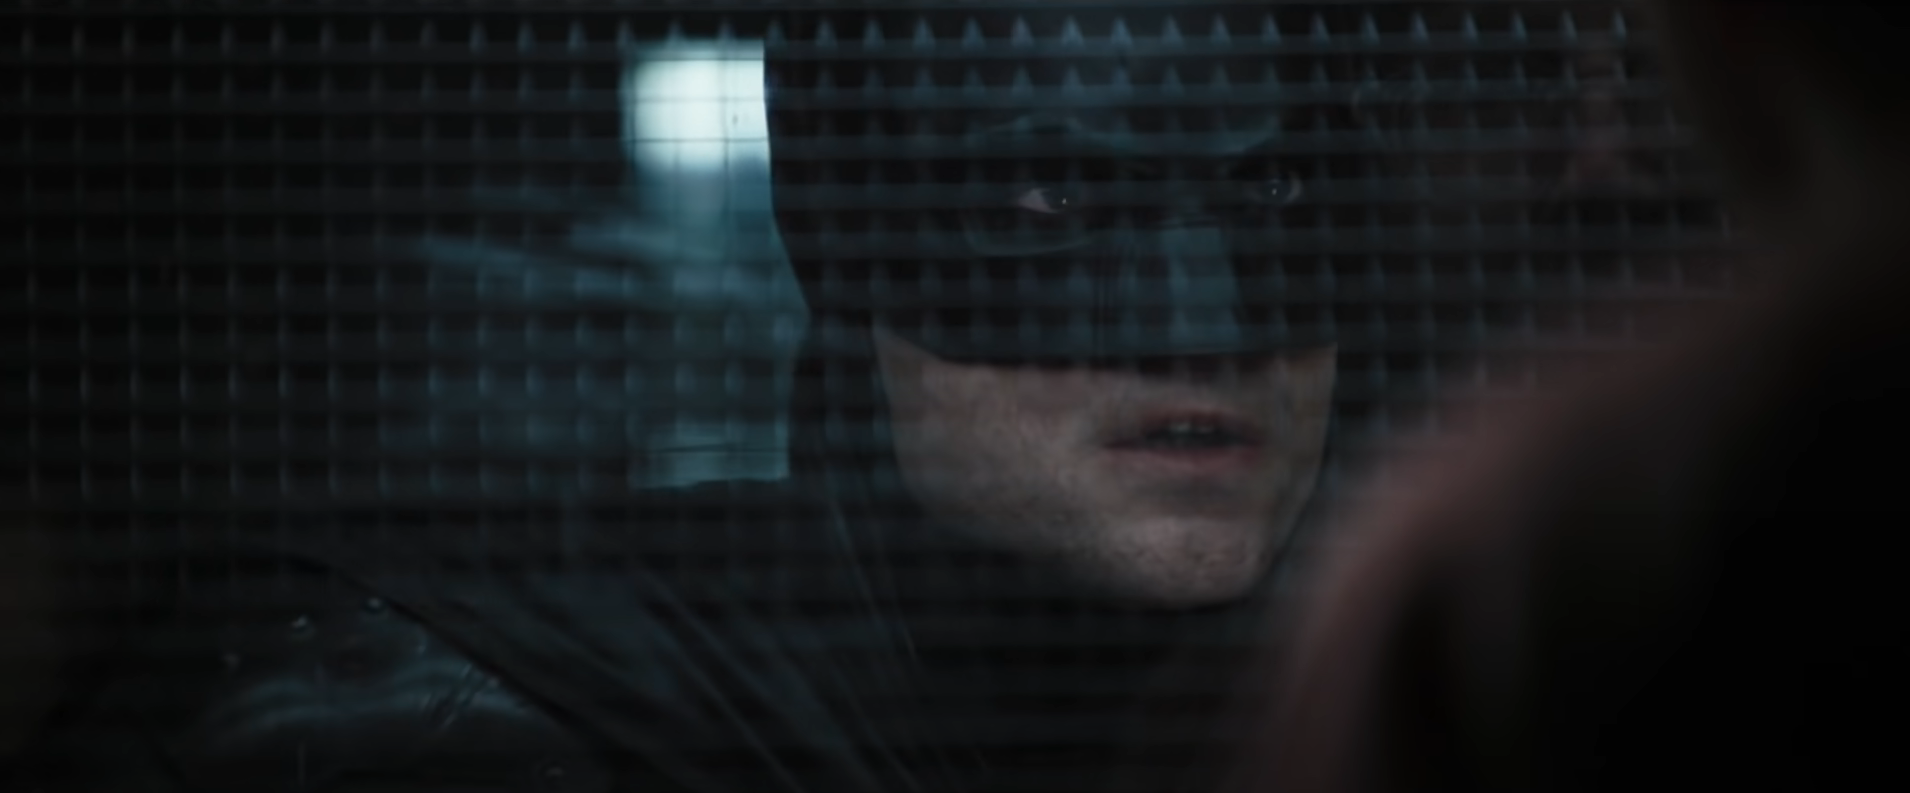 "Batman" remained the box office leader for the third weekend